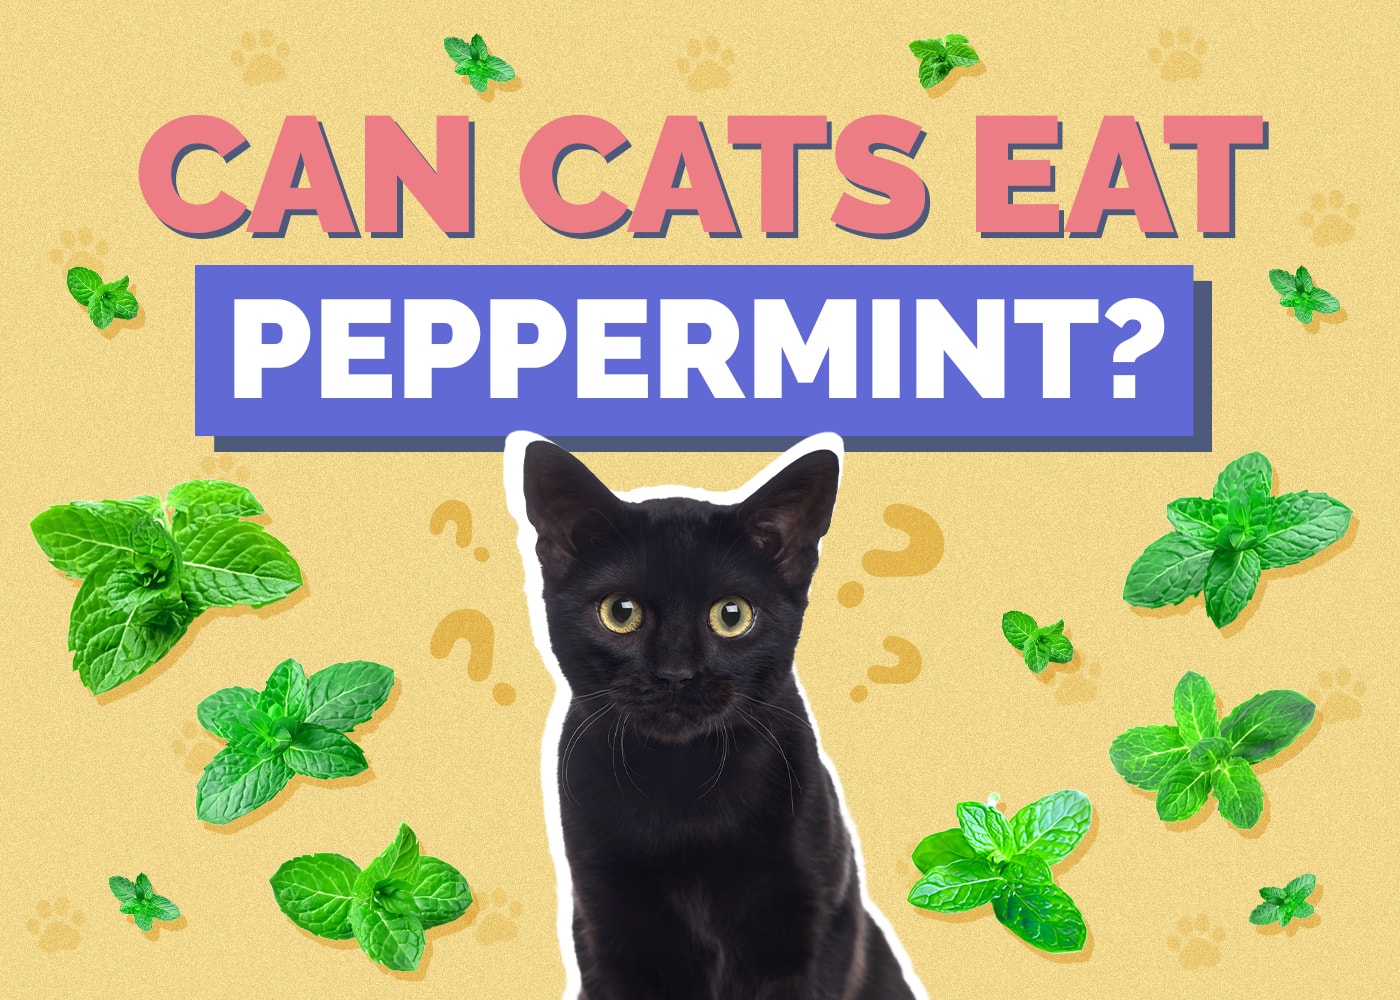 Can Cats Eat peppermint